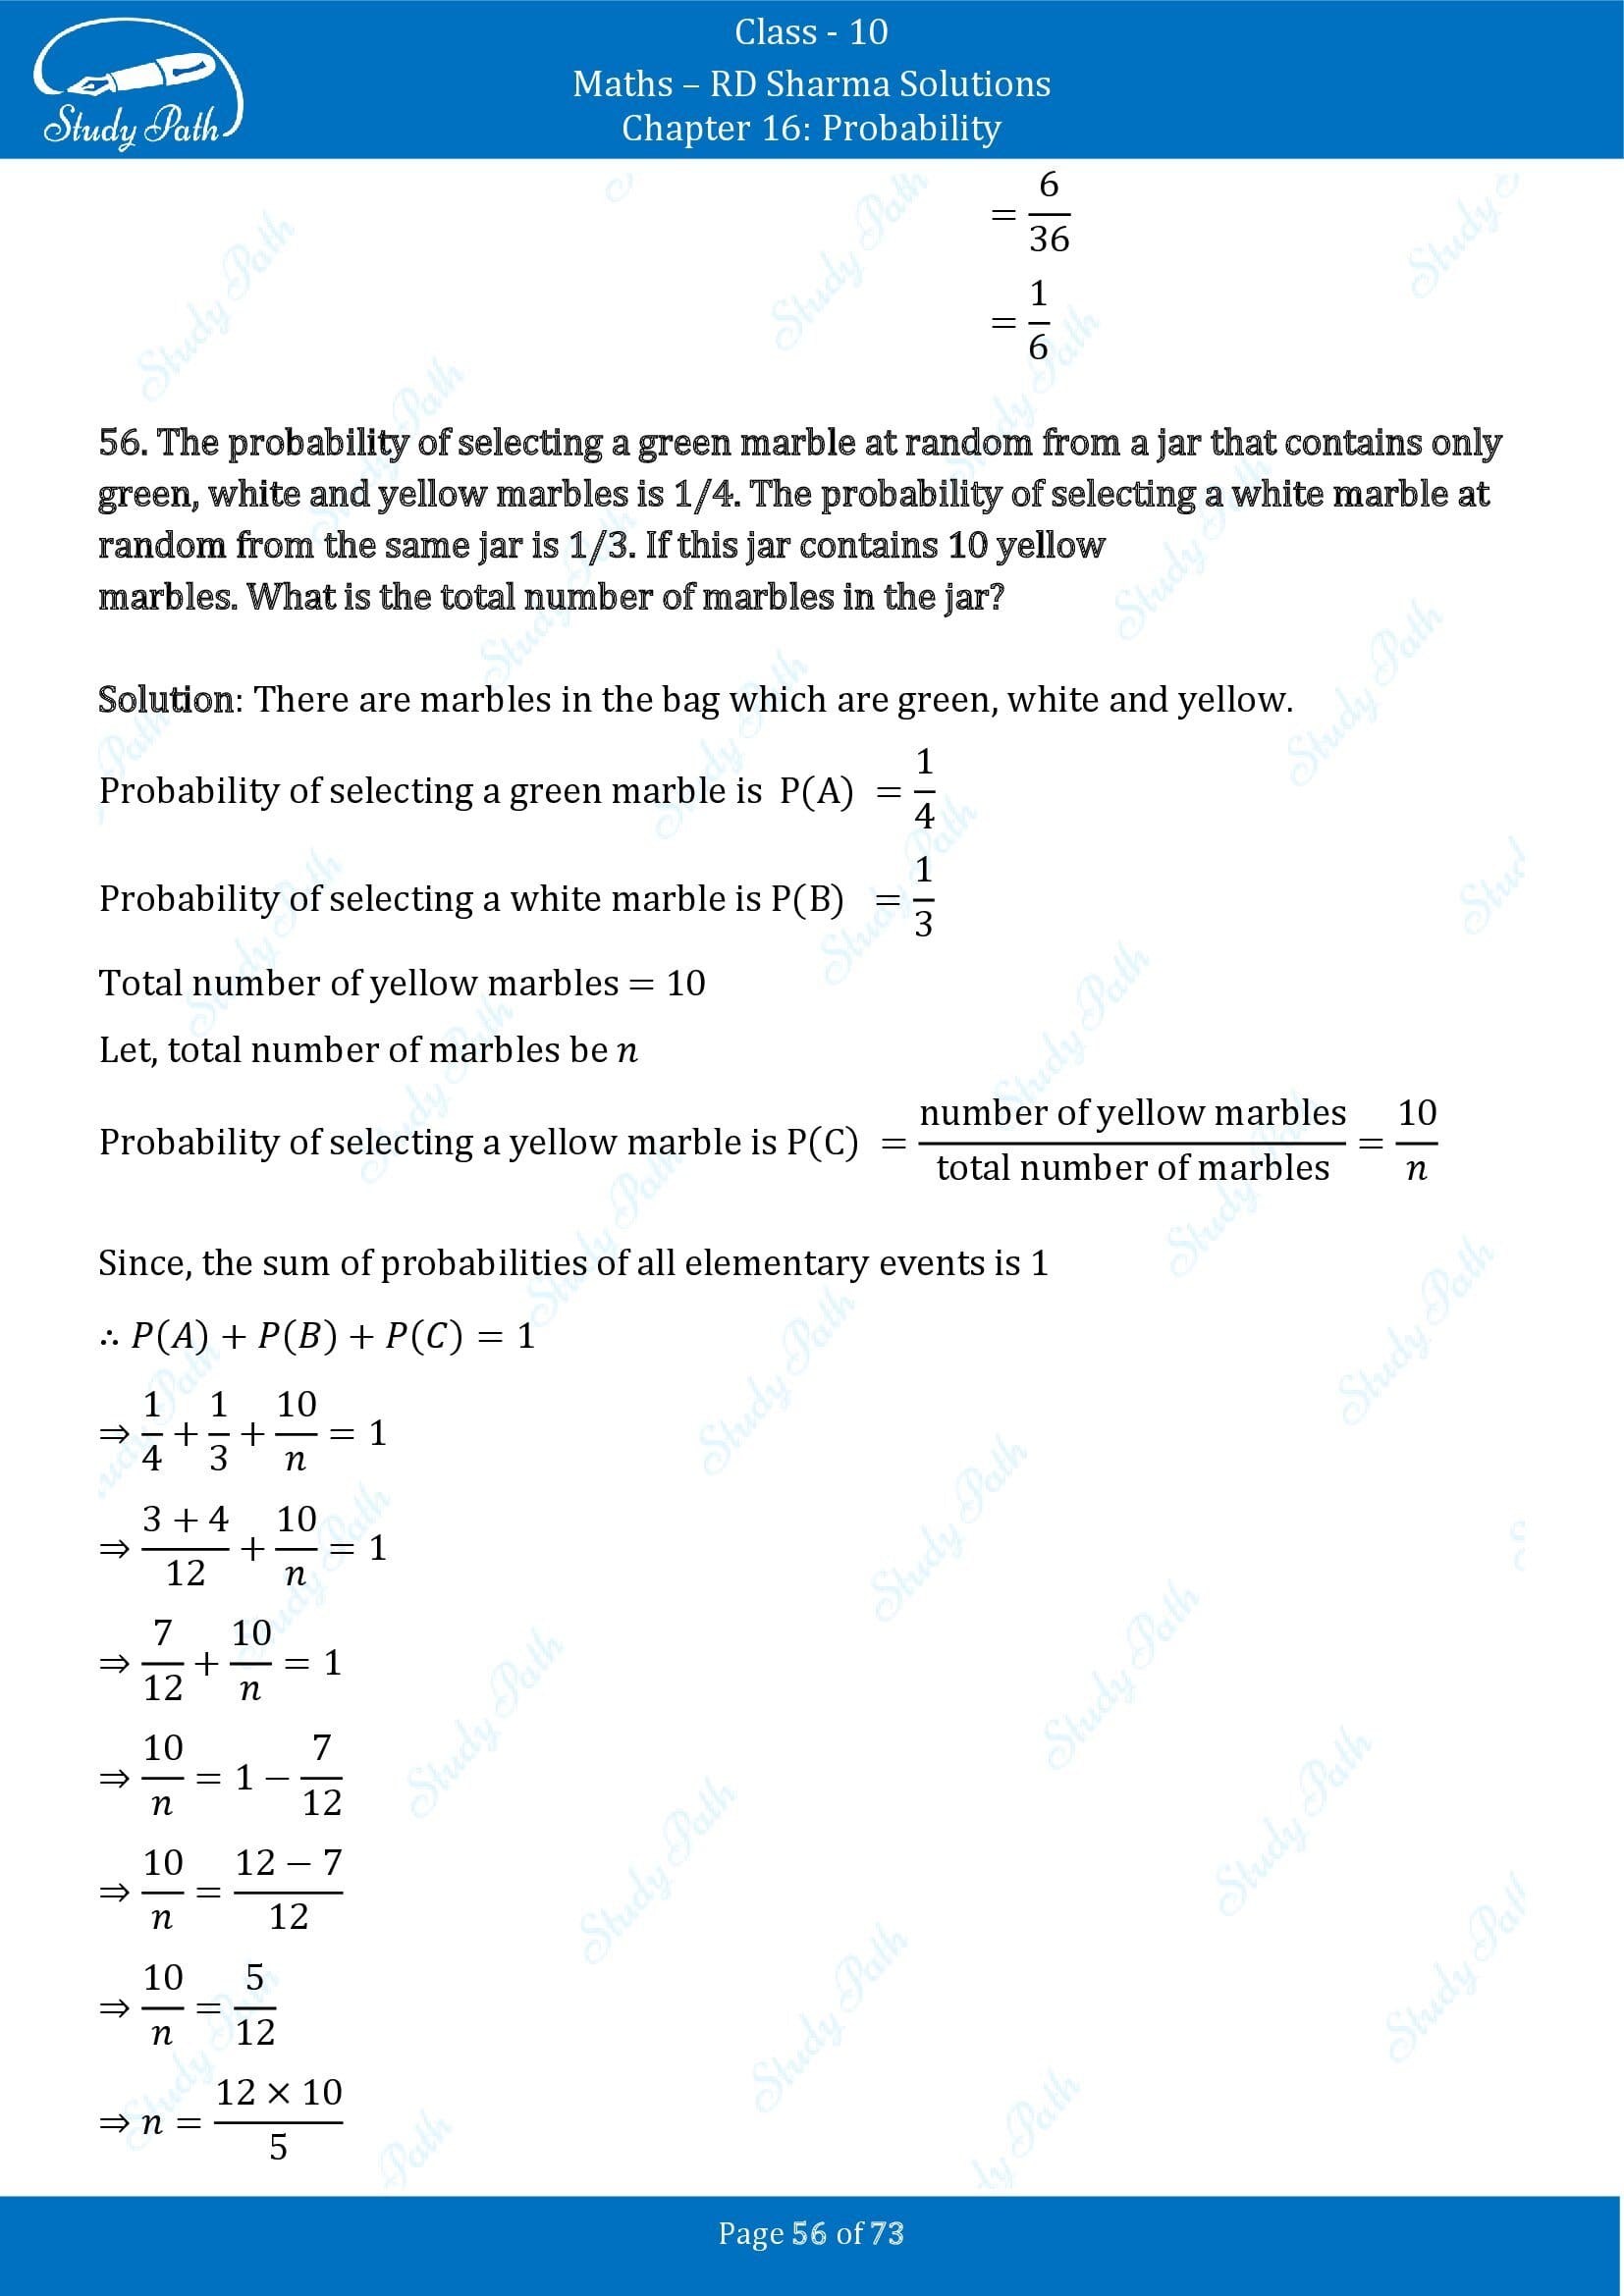 RD Sharma Solutions Class 10 Chapter 16 Probability Exercise 16.1 00056